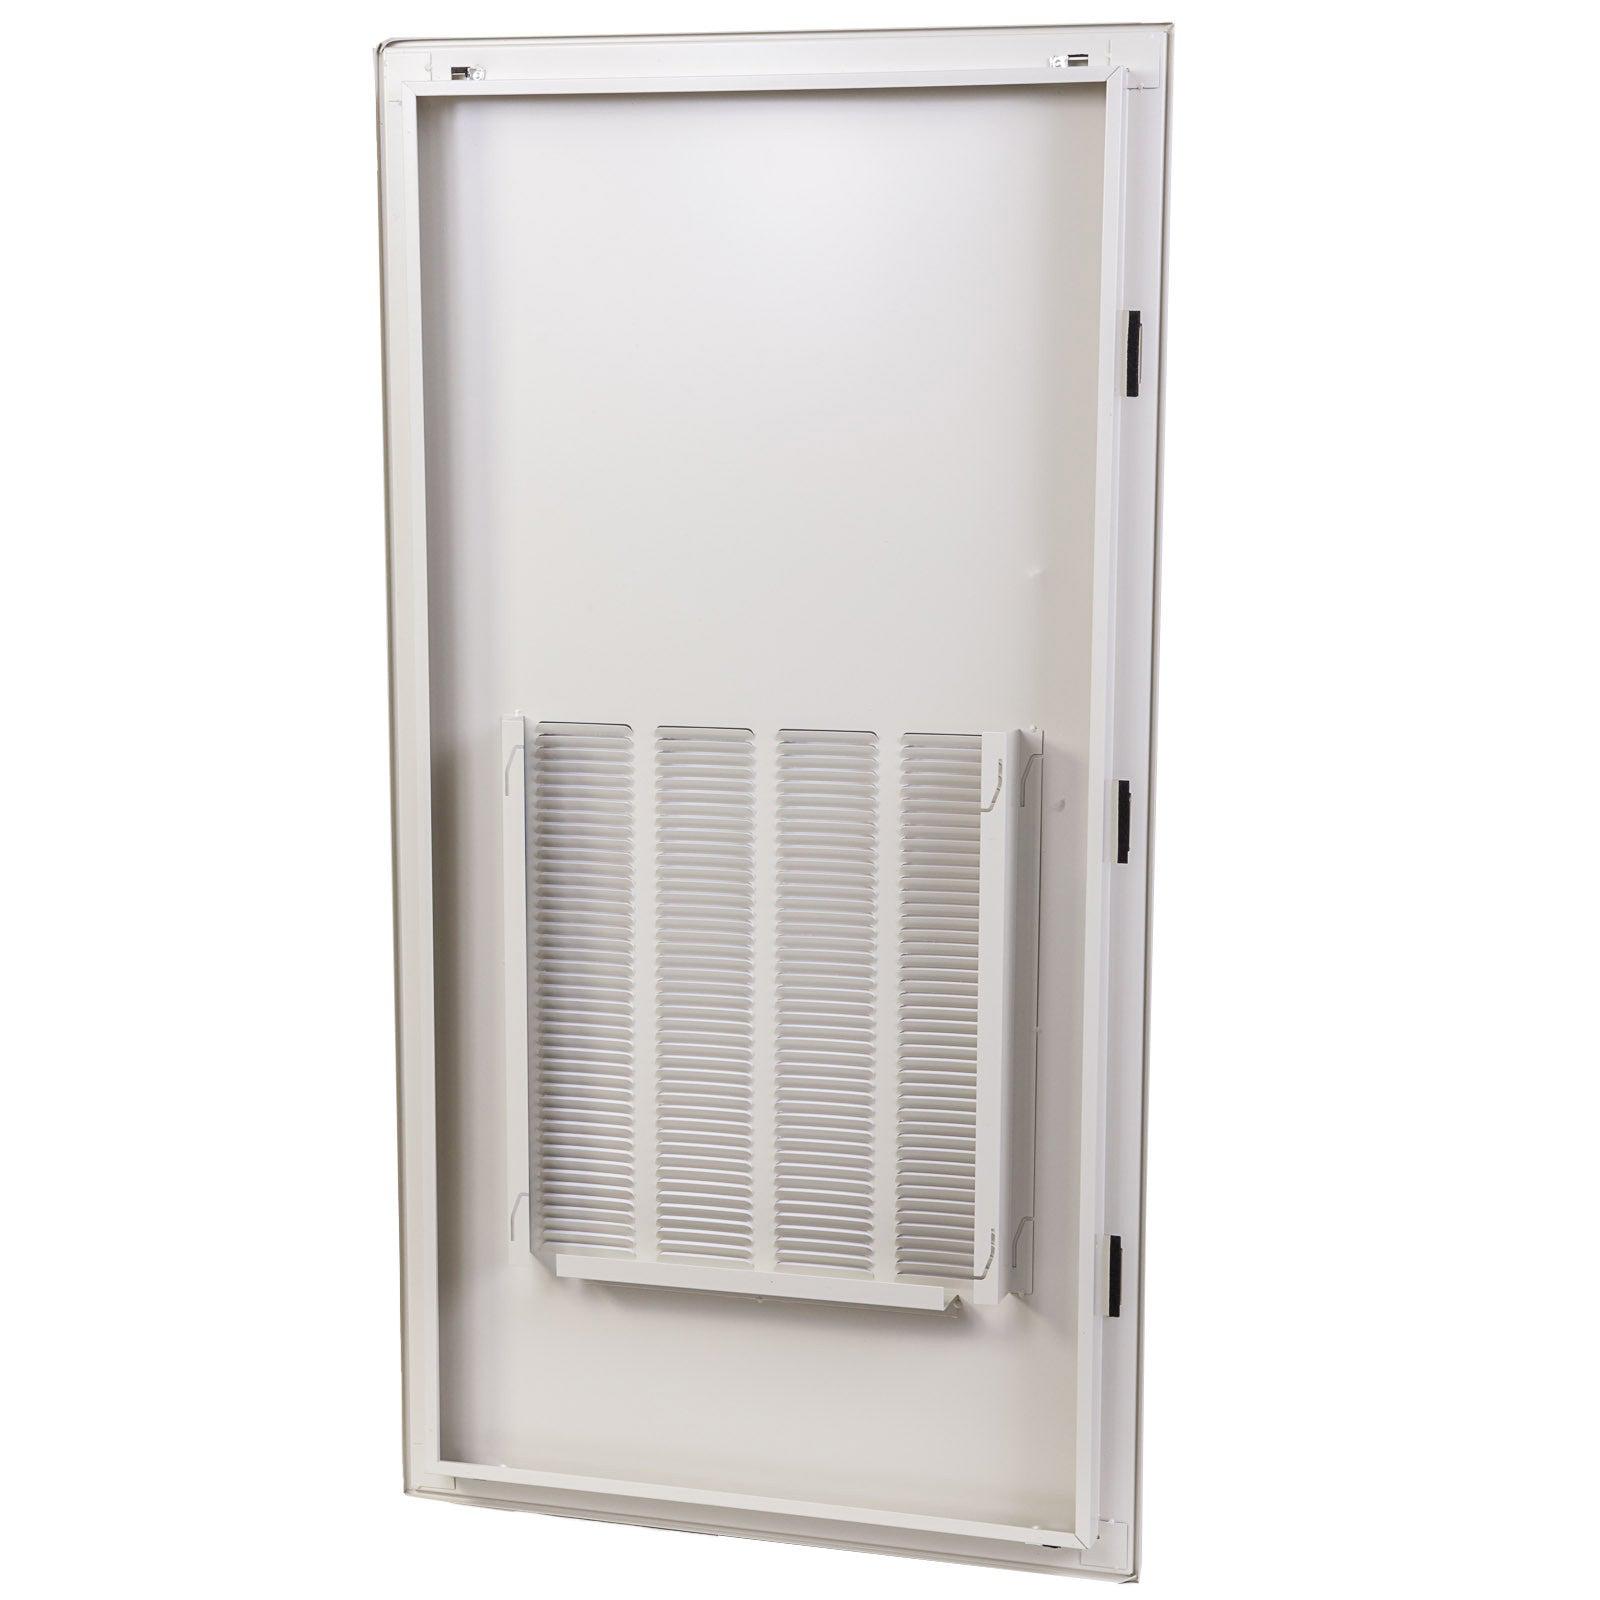 GE Access Panel with Return Air Grille for Large Chassis